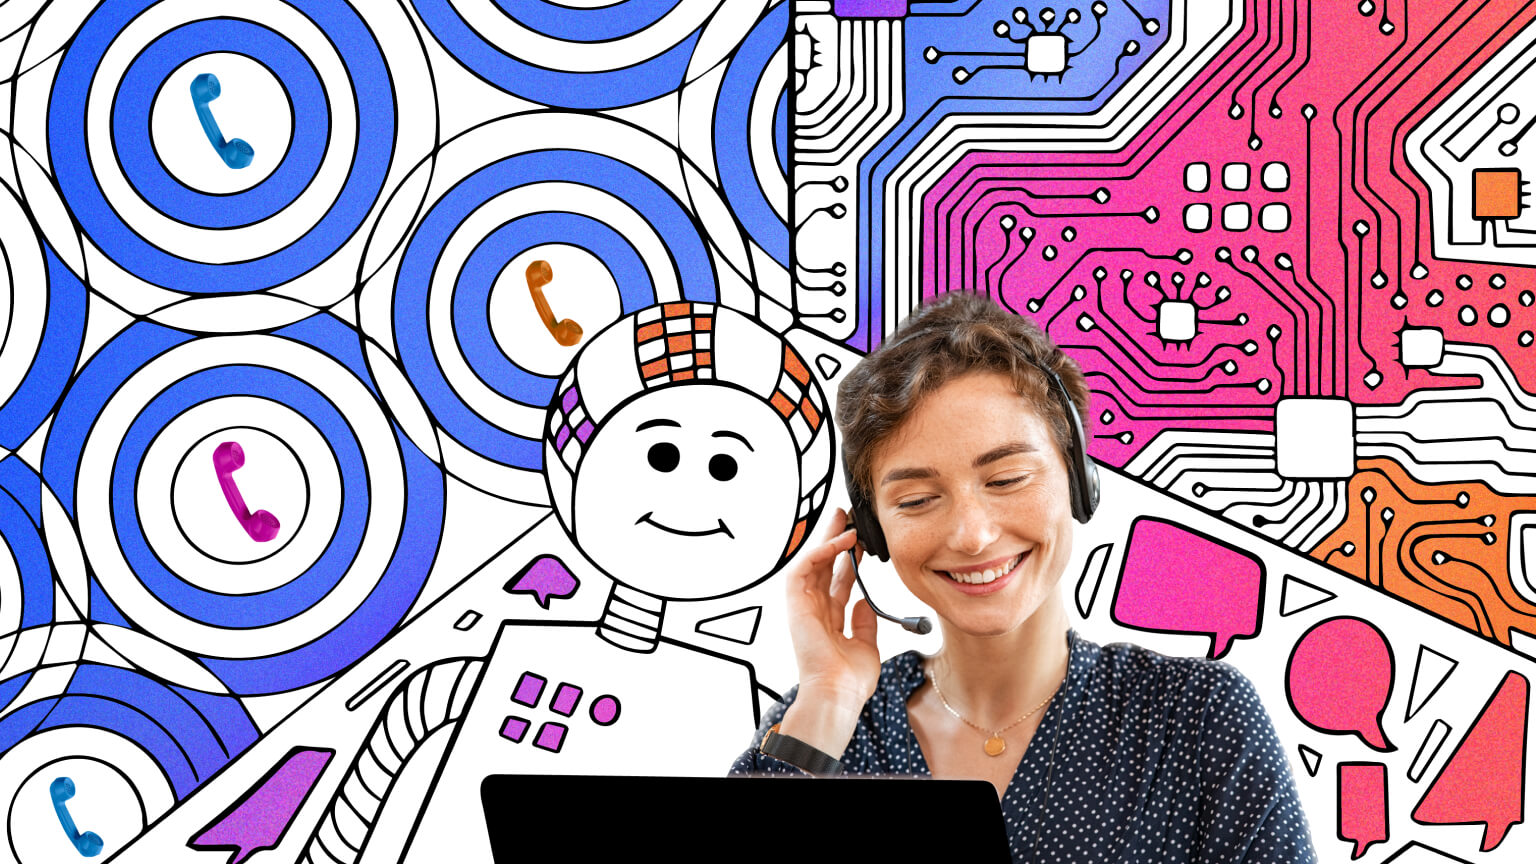 Illustrated Conversational AI chatbot helping customer service leaders respond in contact centers to improve customer satisfaction